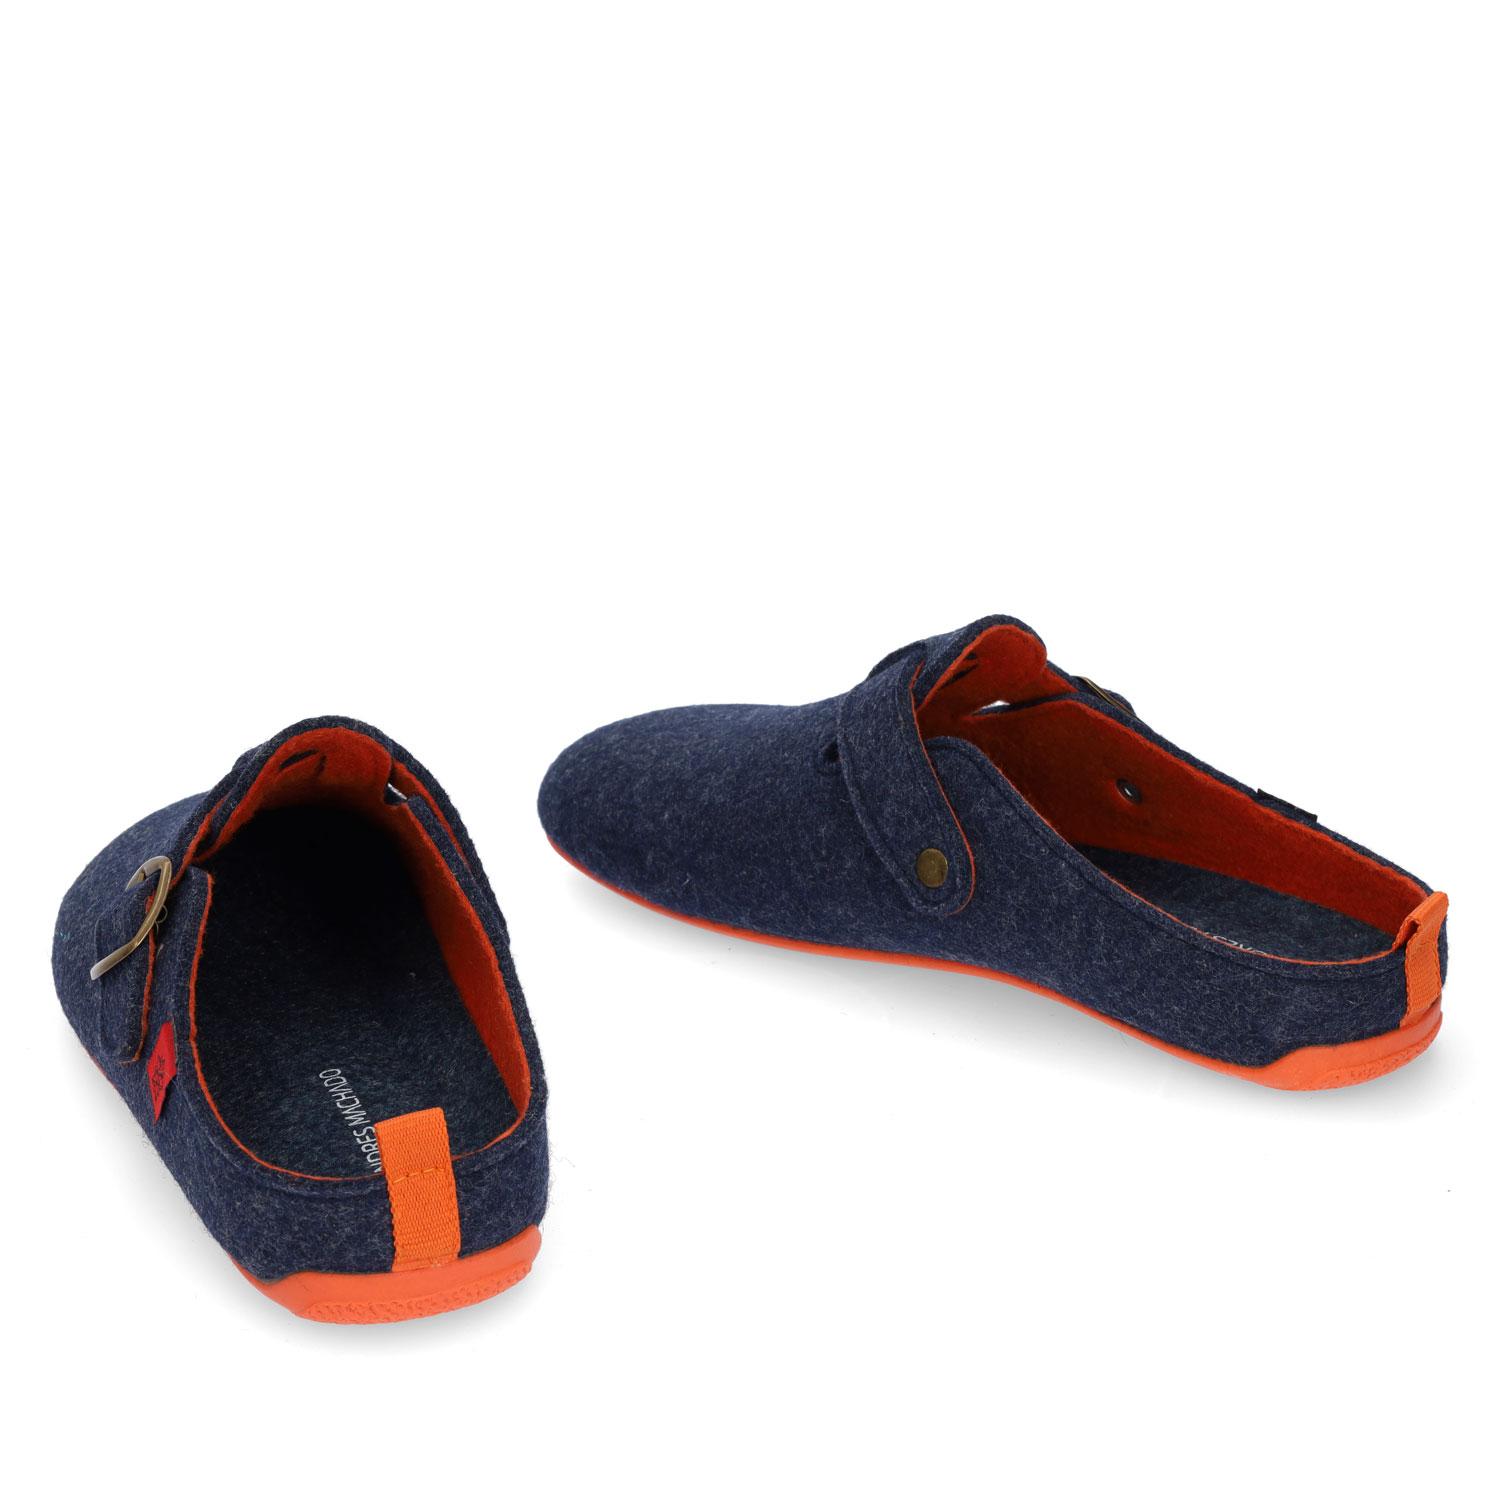 Unisex home slippers in blue felt and buckle detail 